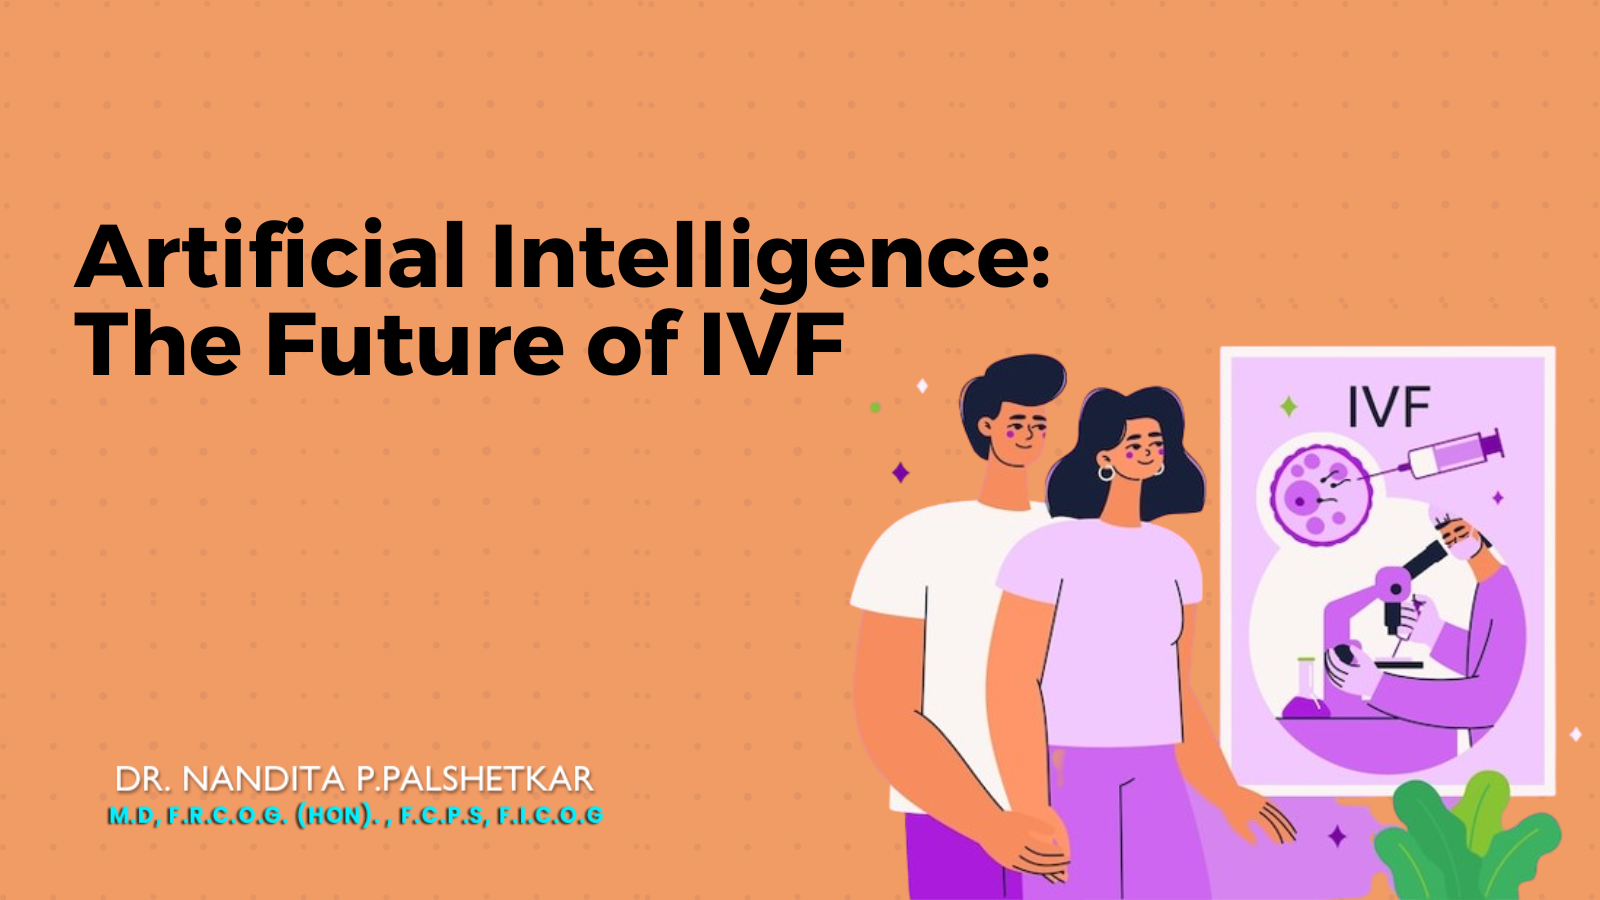 Artificial Intelligence: The Future of IVF